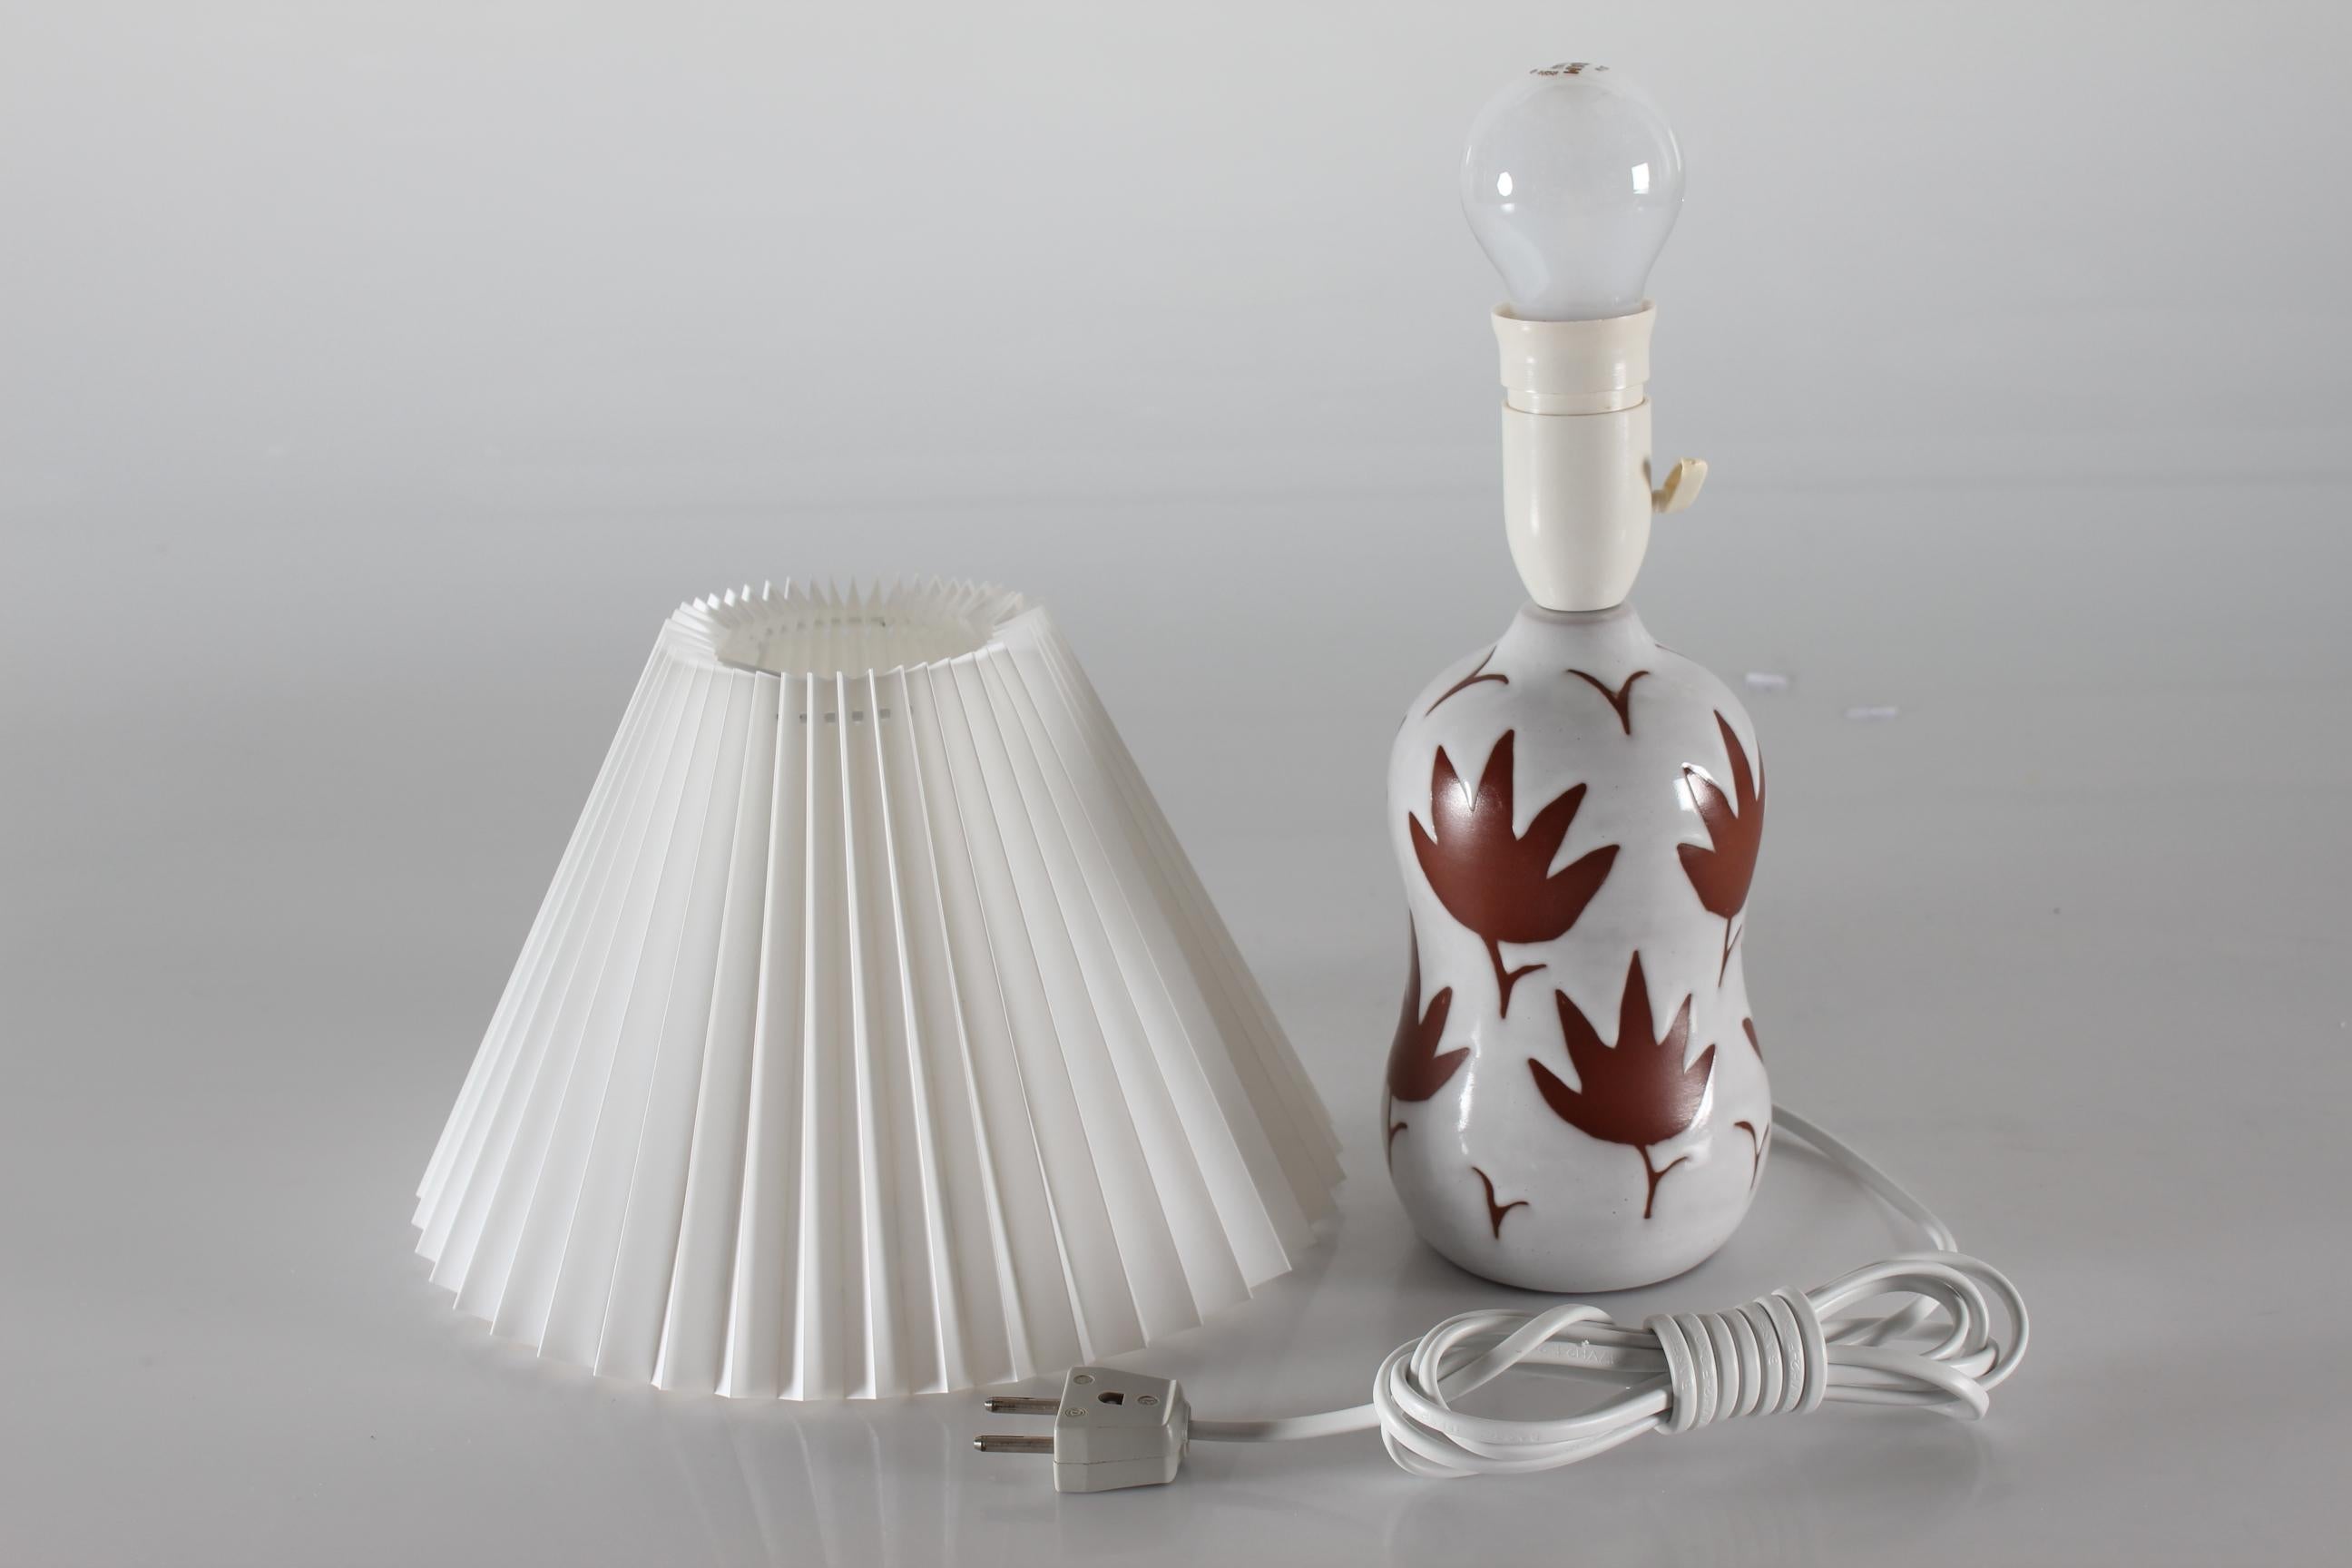 Mid-Century Modern Danish Ceramic Table Lamp with White Glaze and Brown Leaf Pattern 1950s